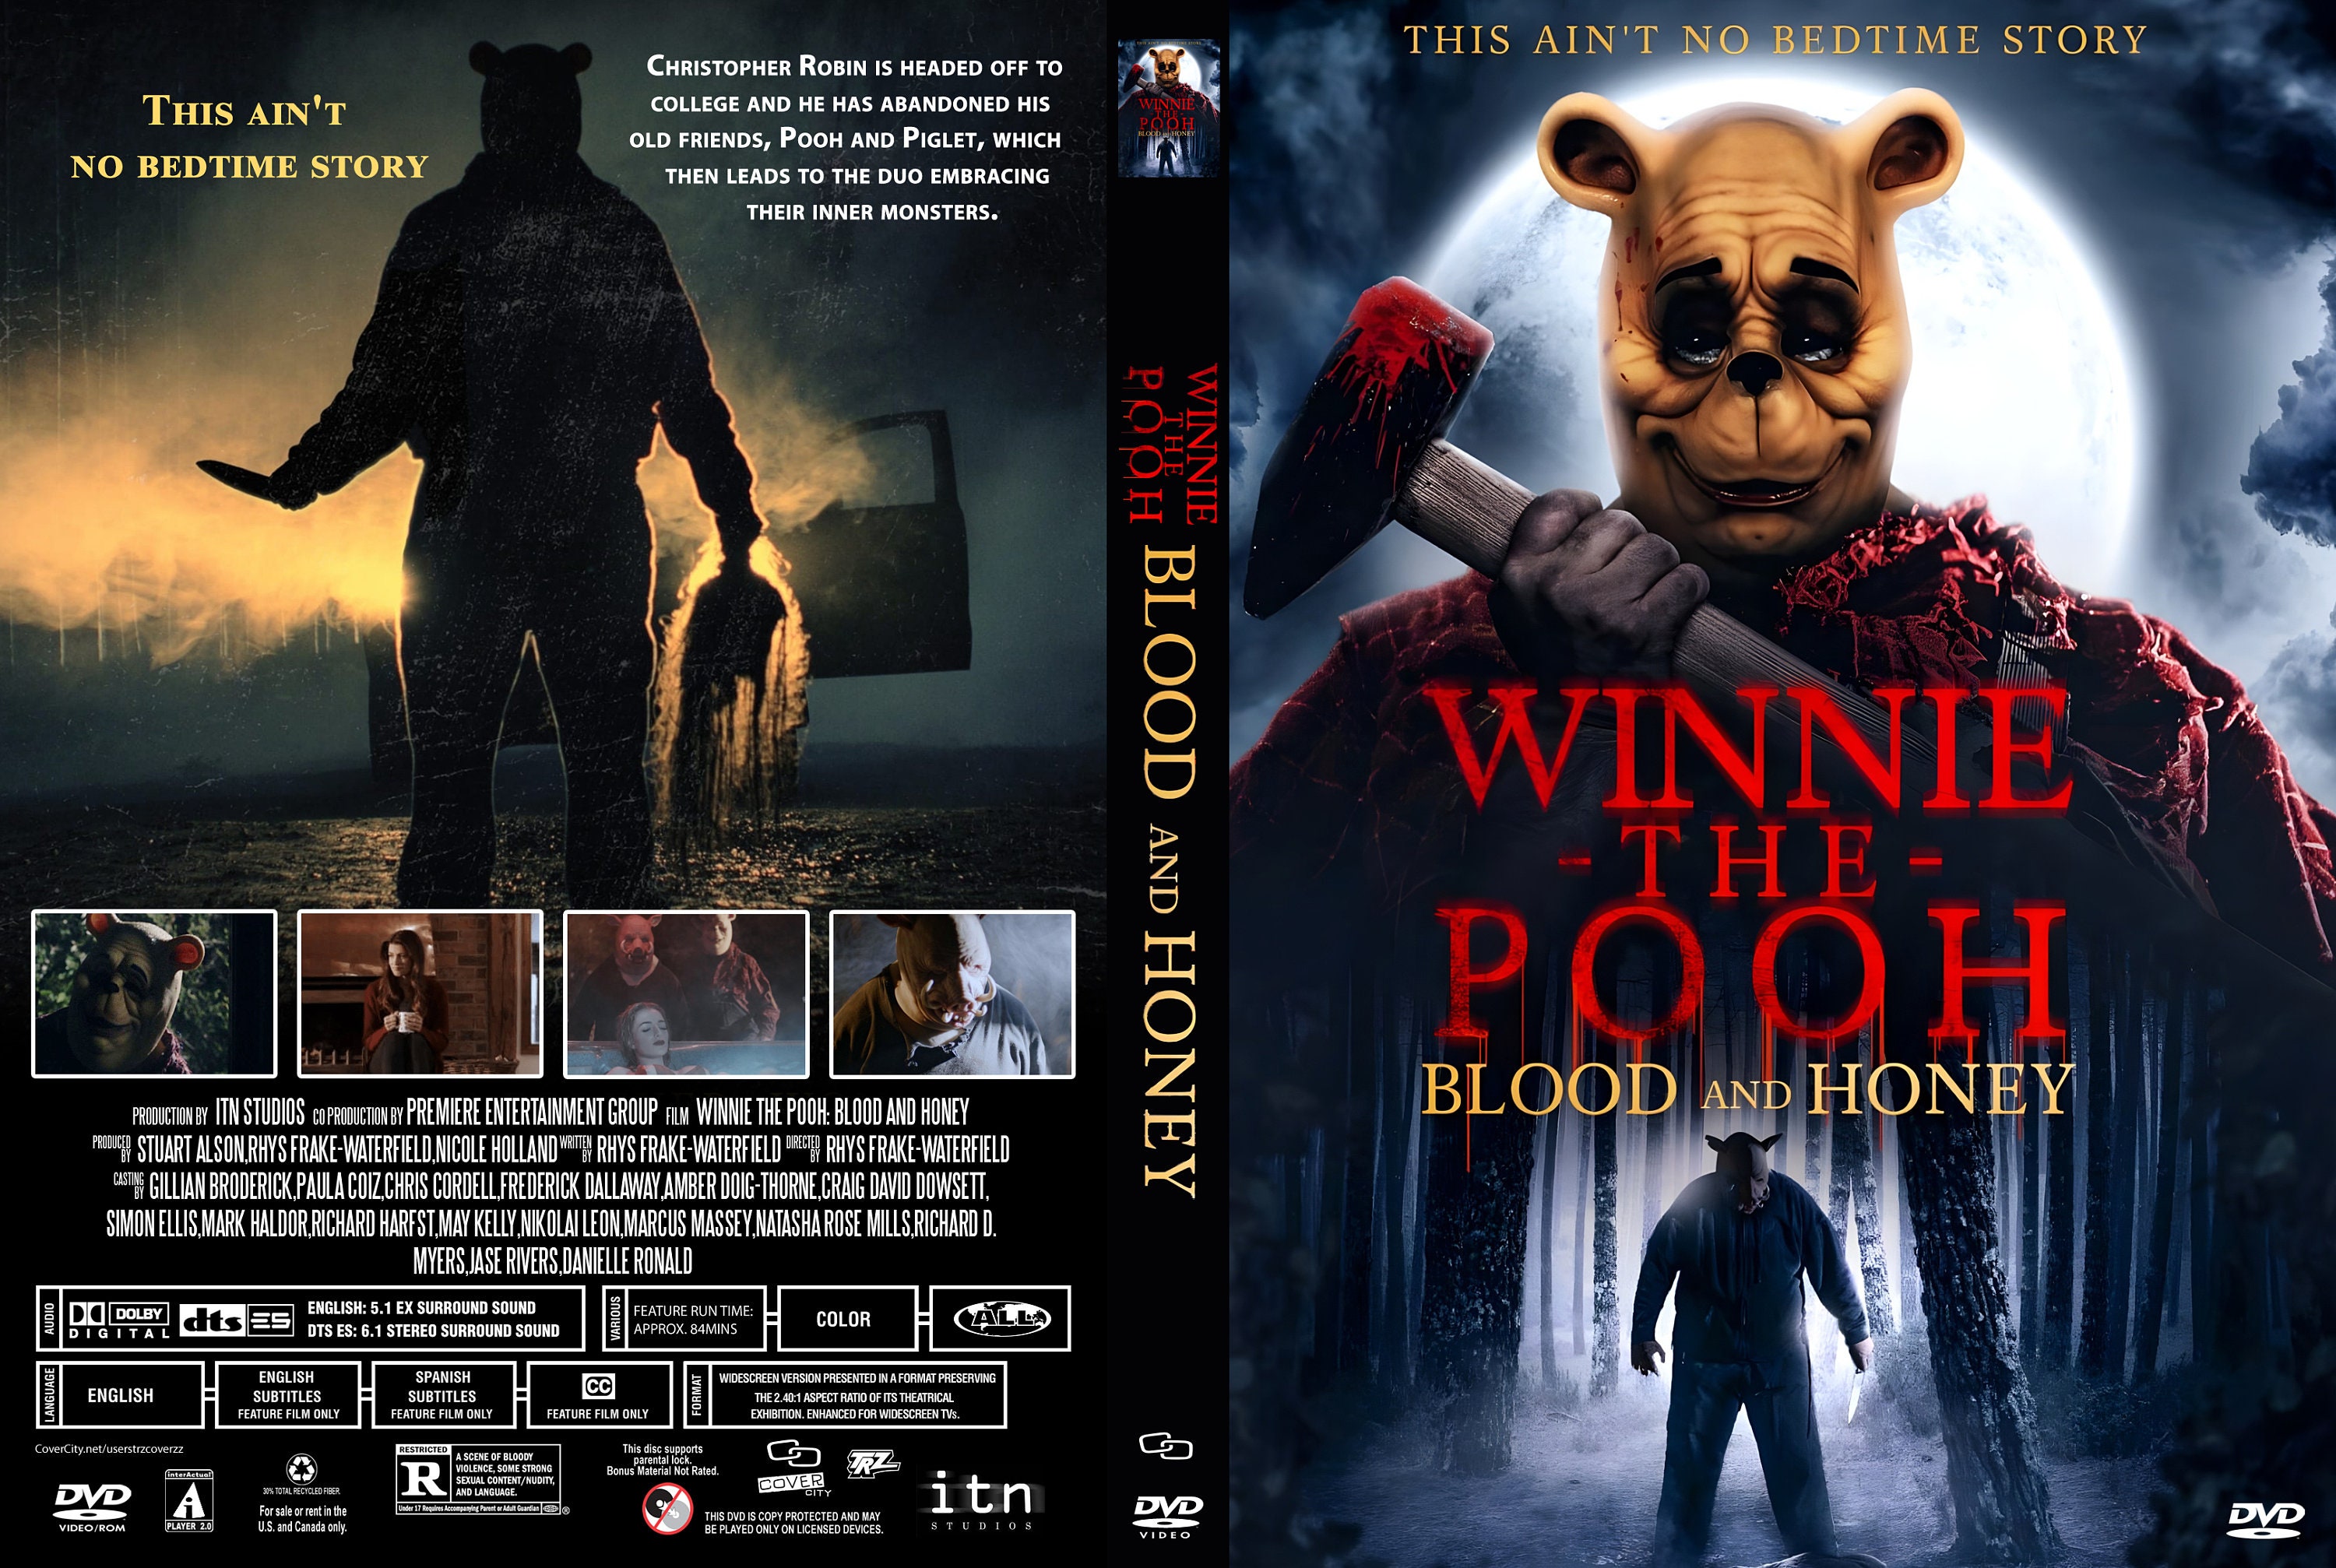 Winnie-the-pooh Blood and Honey 2023 DVD Cover Printable